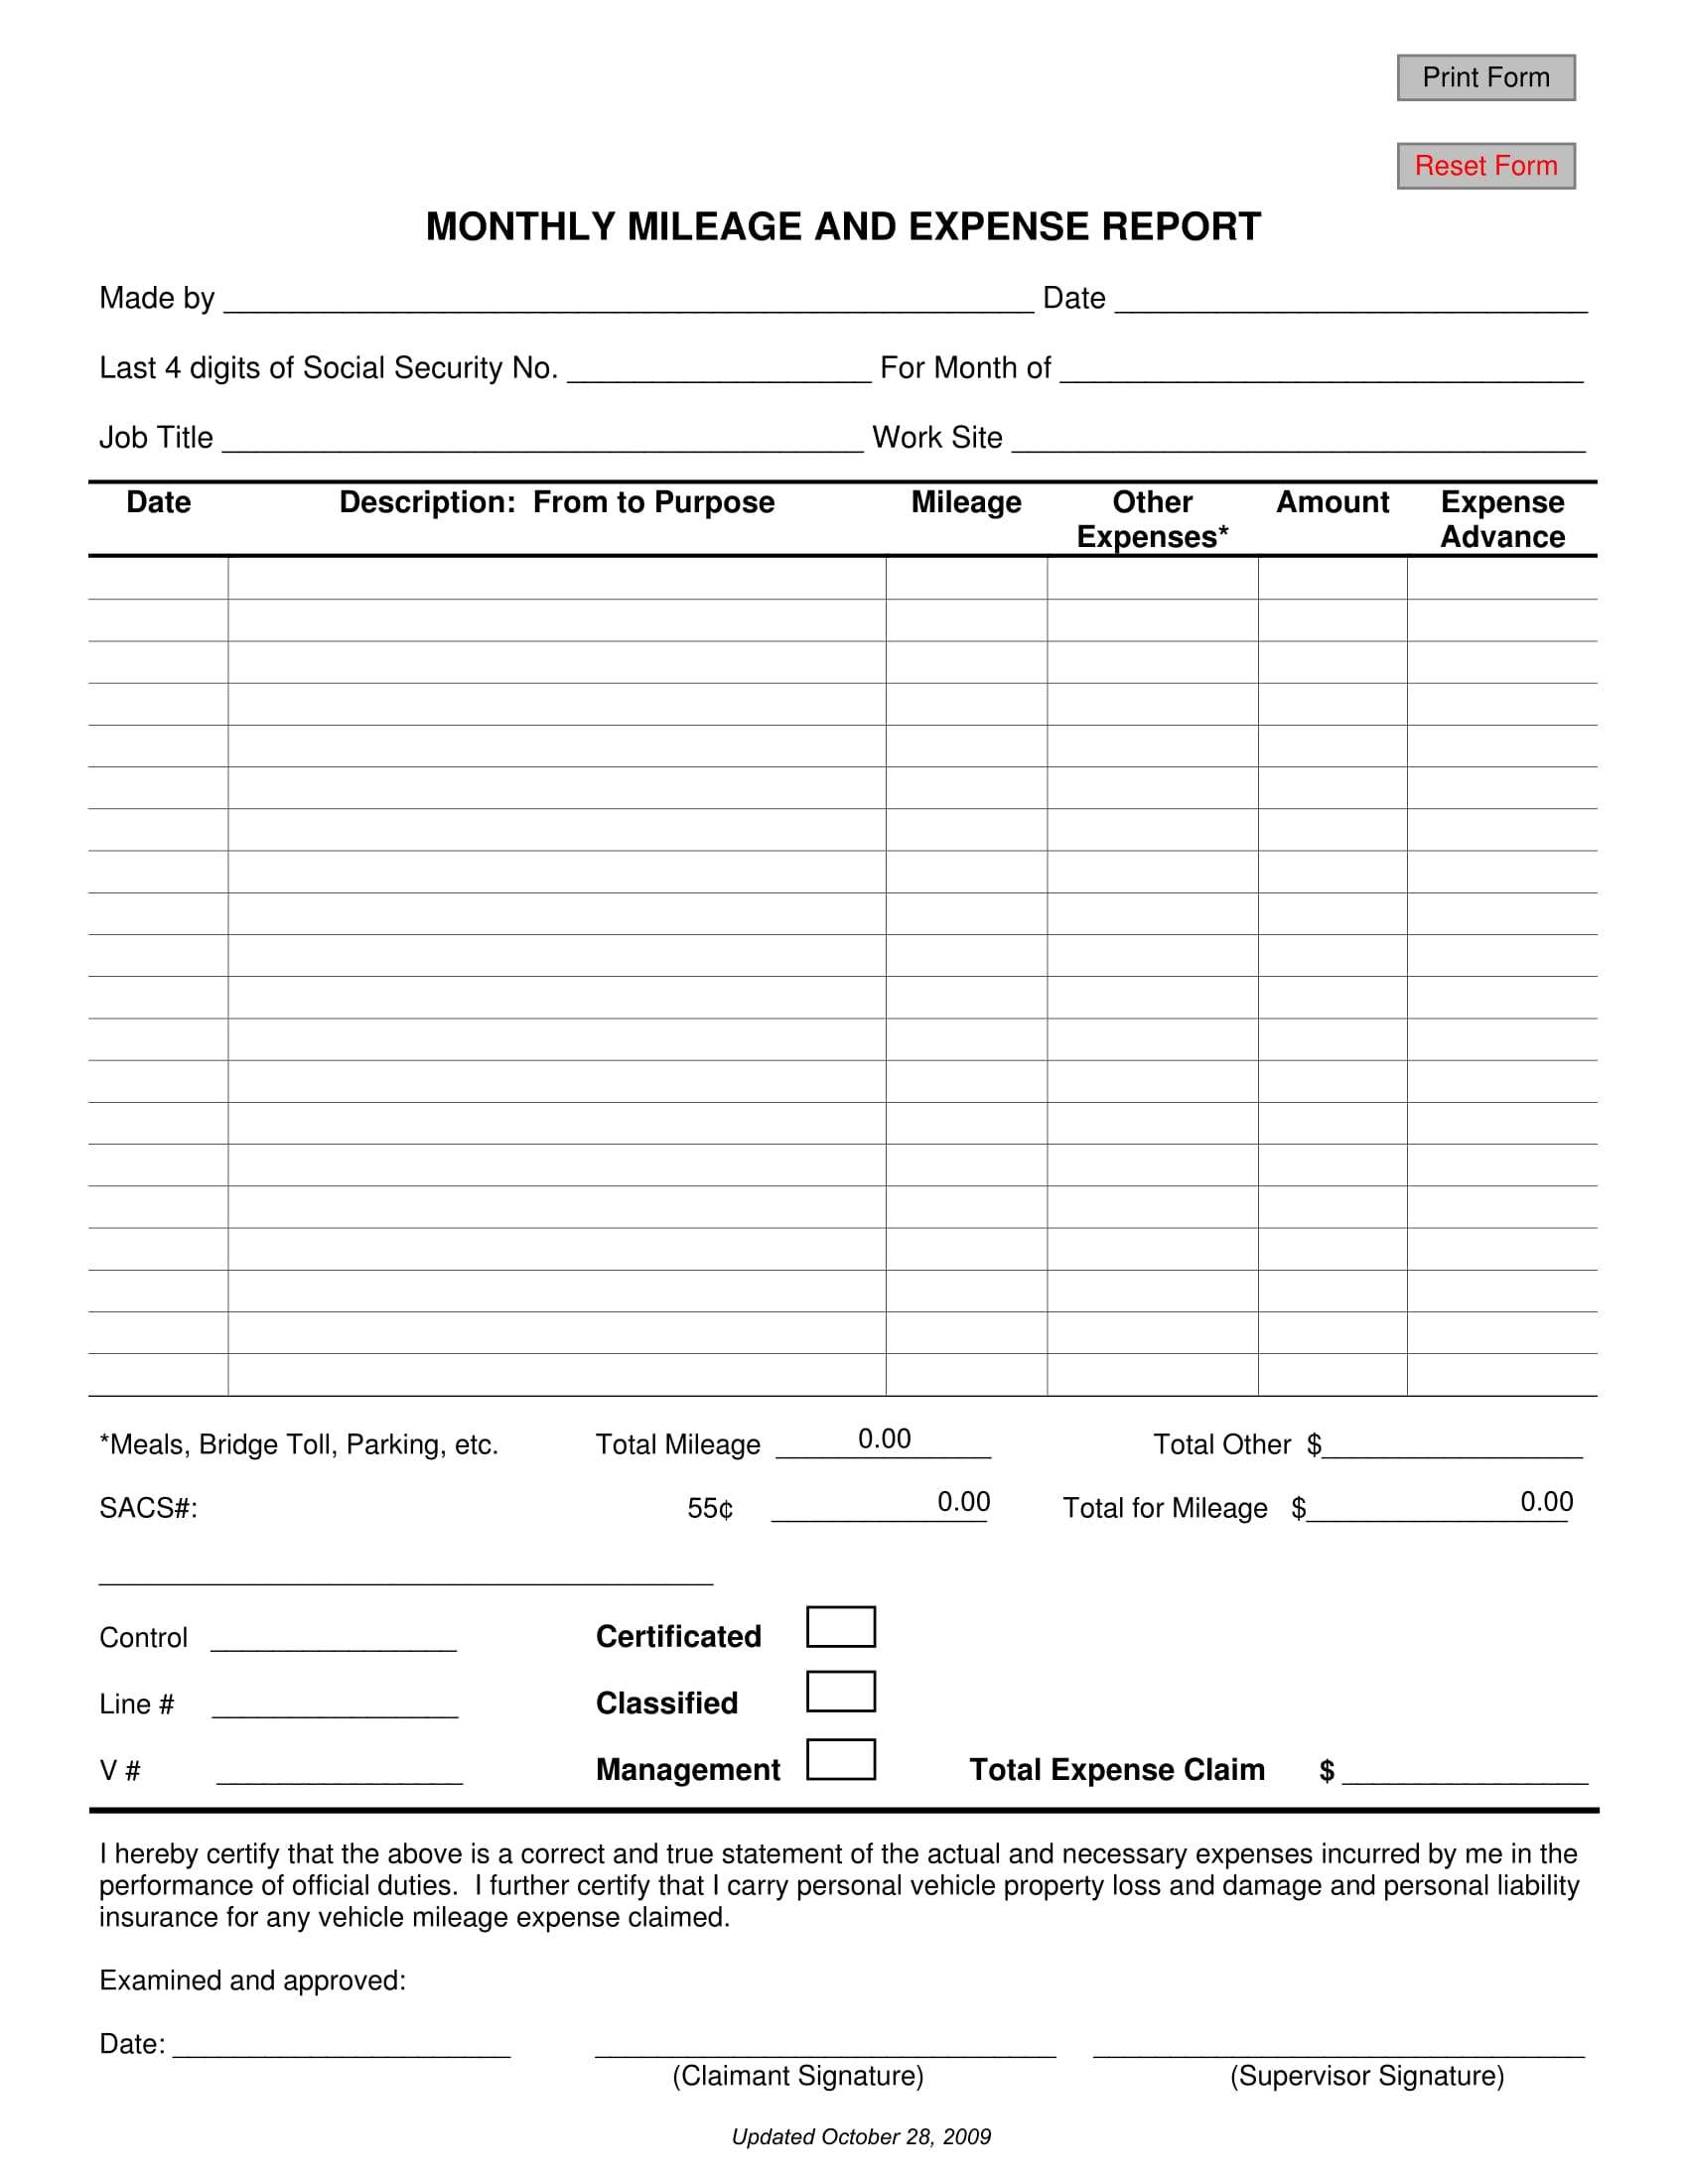 FREE 5+ Mileage Report Forms in MS Word